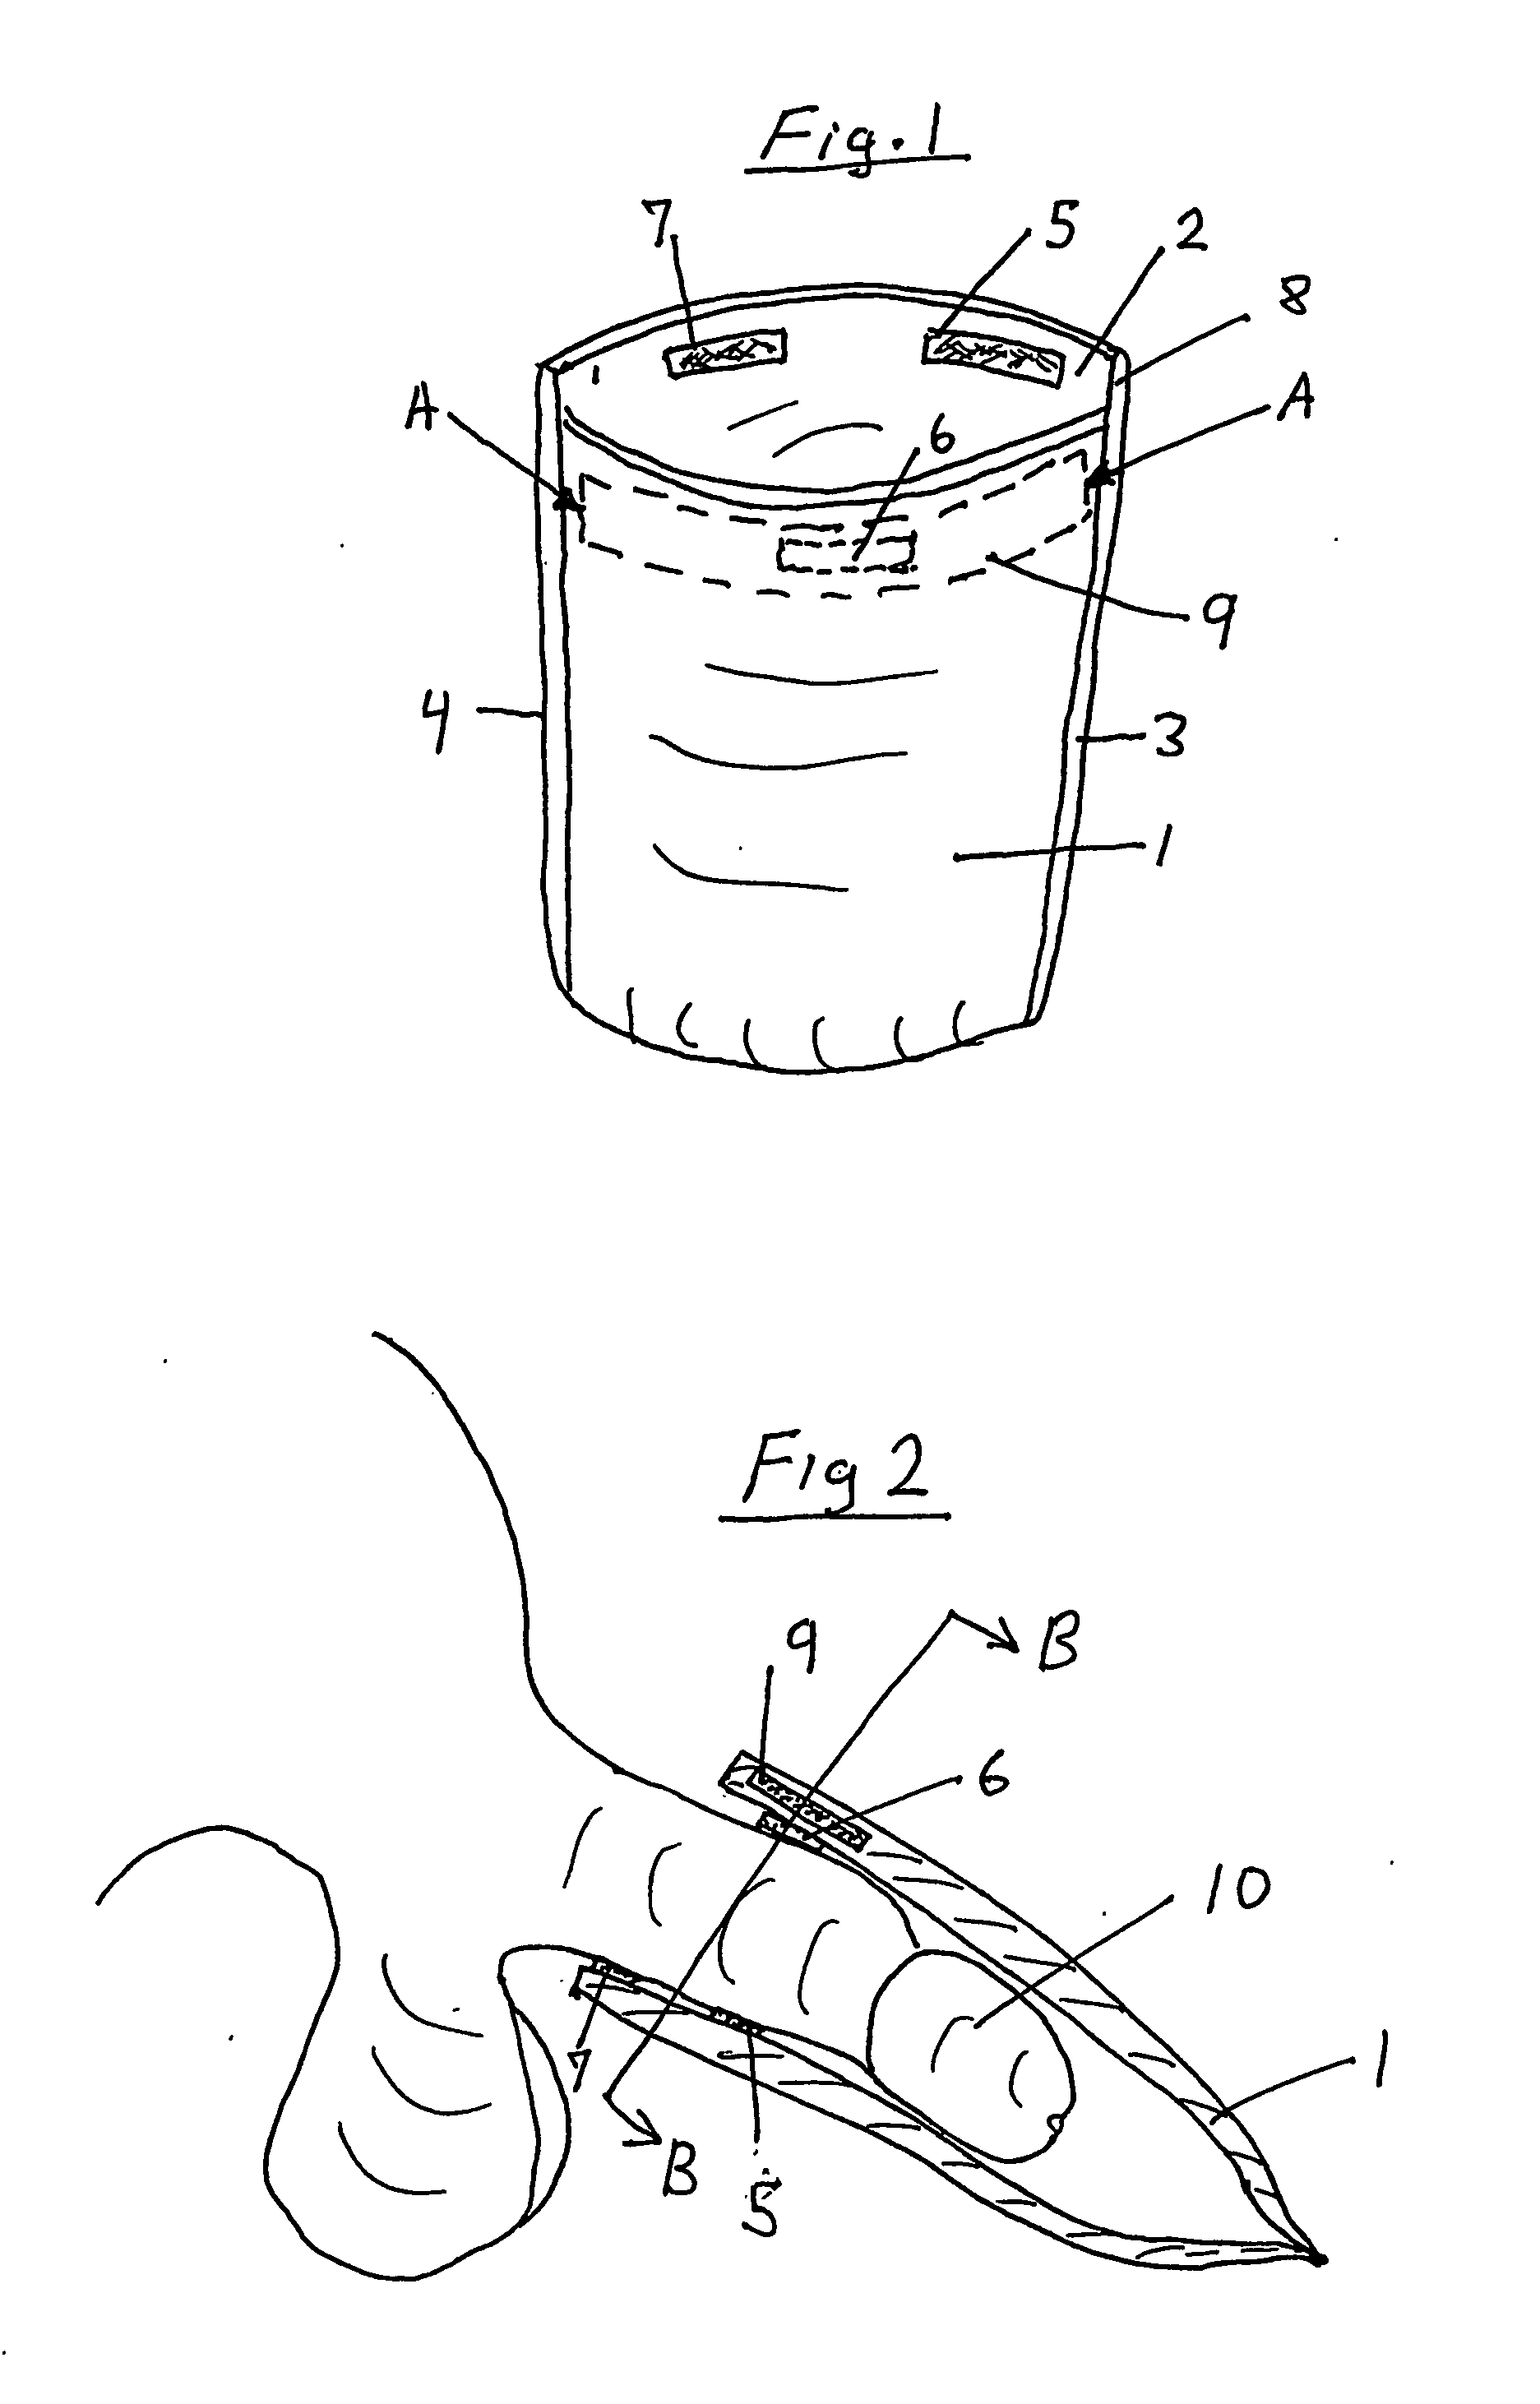 Incontinence protection device for men